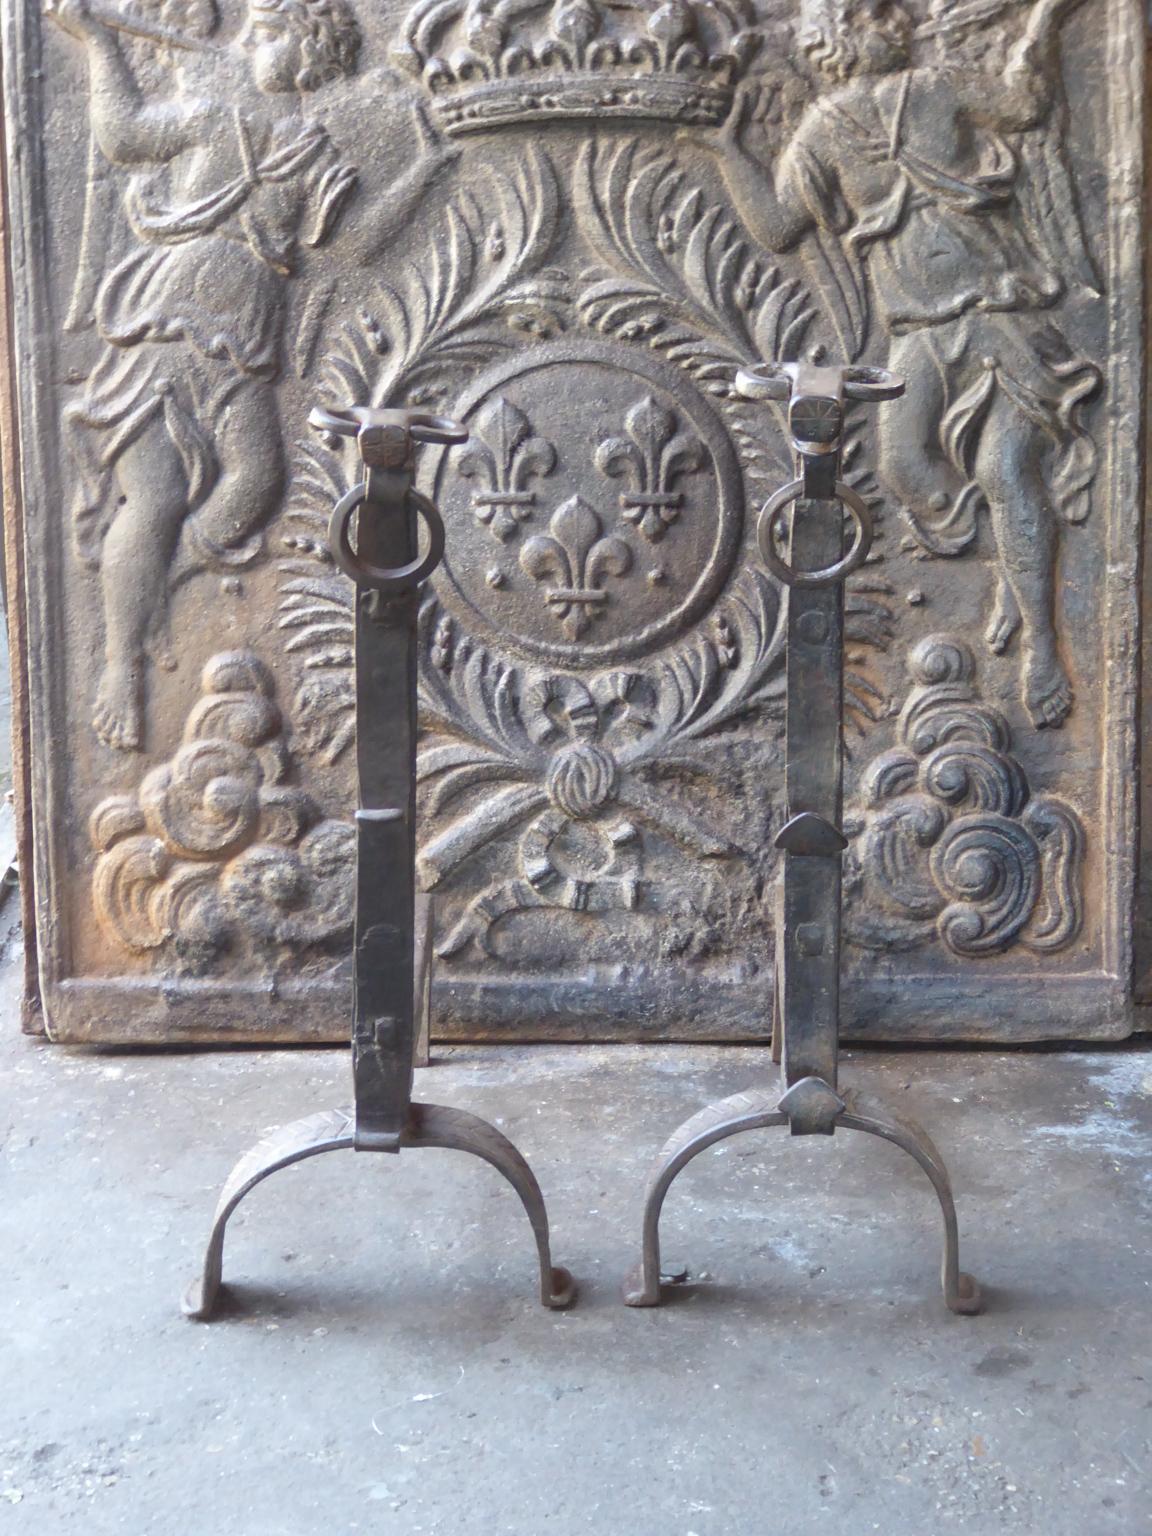 Beautiful 17th century French Gothic andirons made of wrought iron. The tops of the andirons have the shape of bull heads, which is characteristic for this type of andirons. In France they are called 'landiers'.







